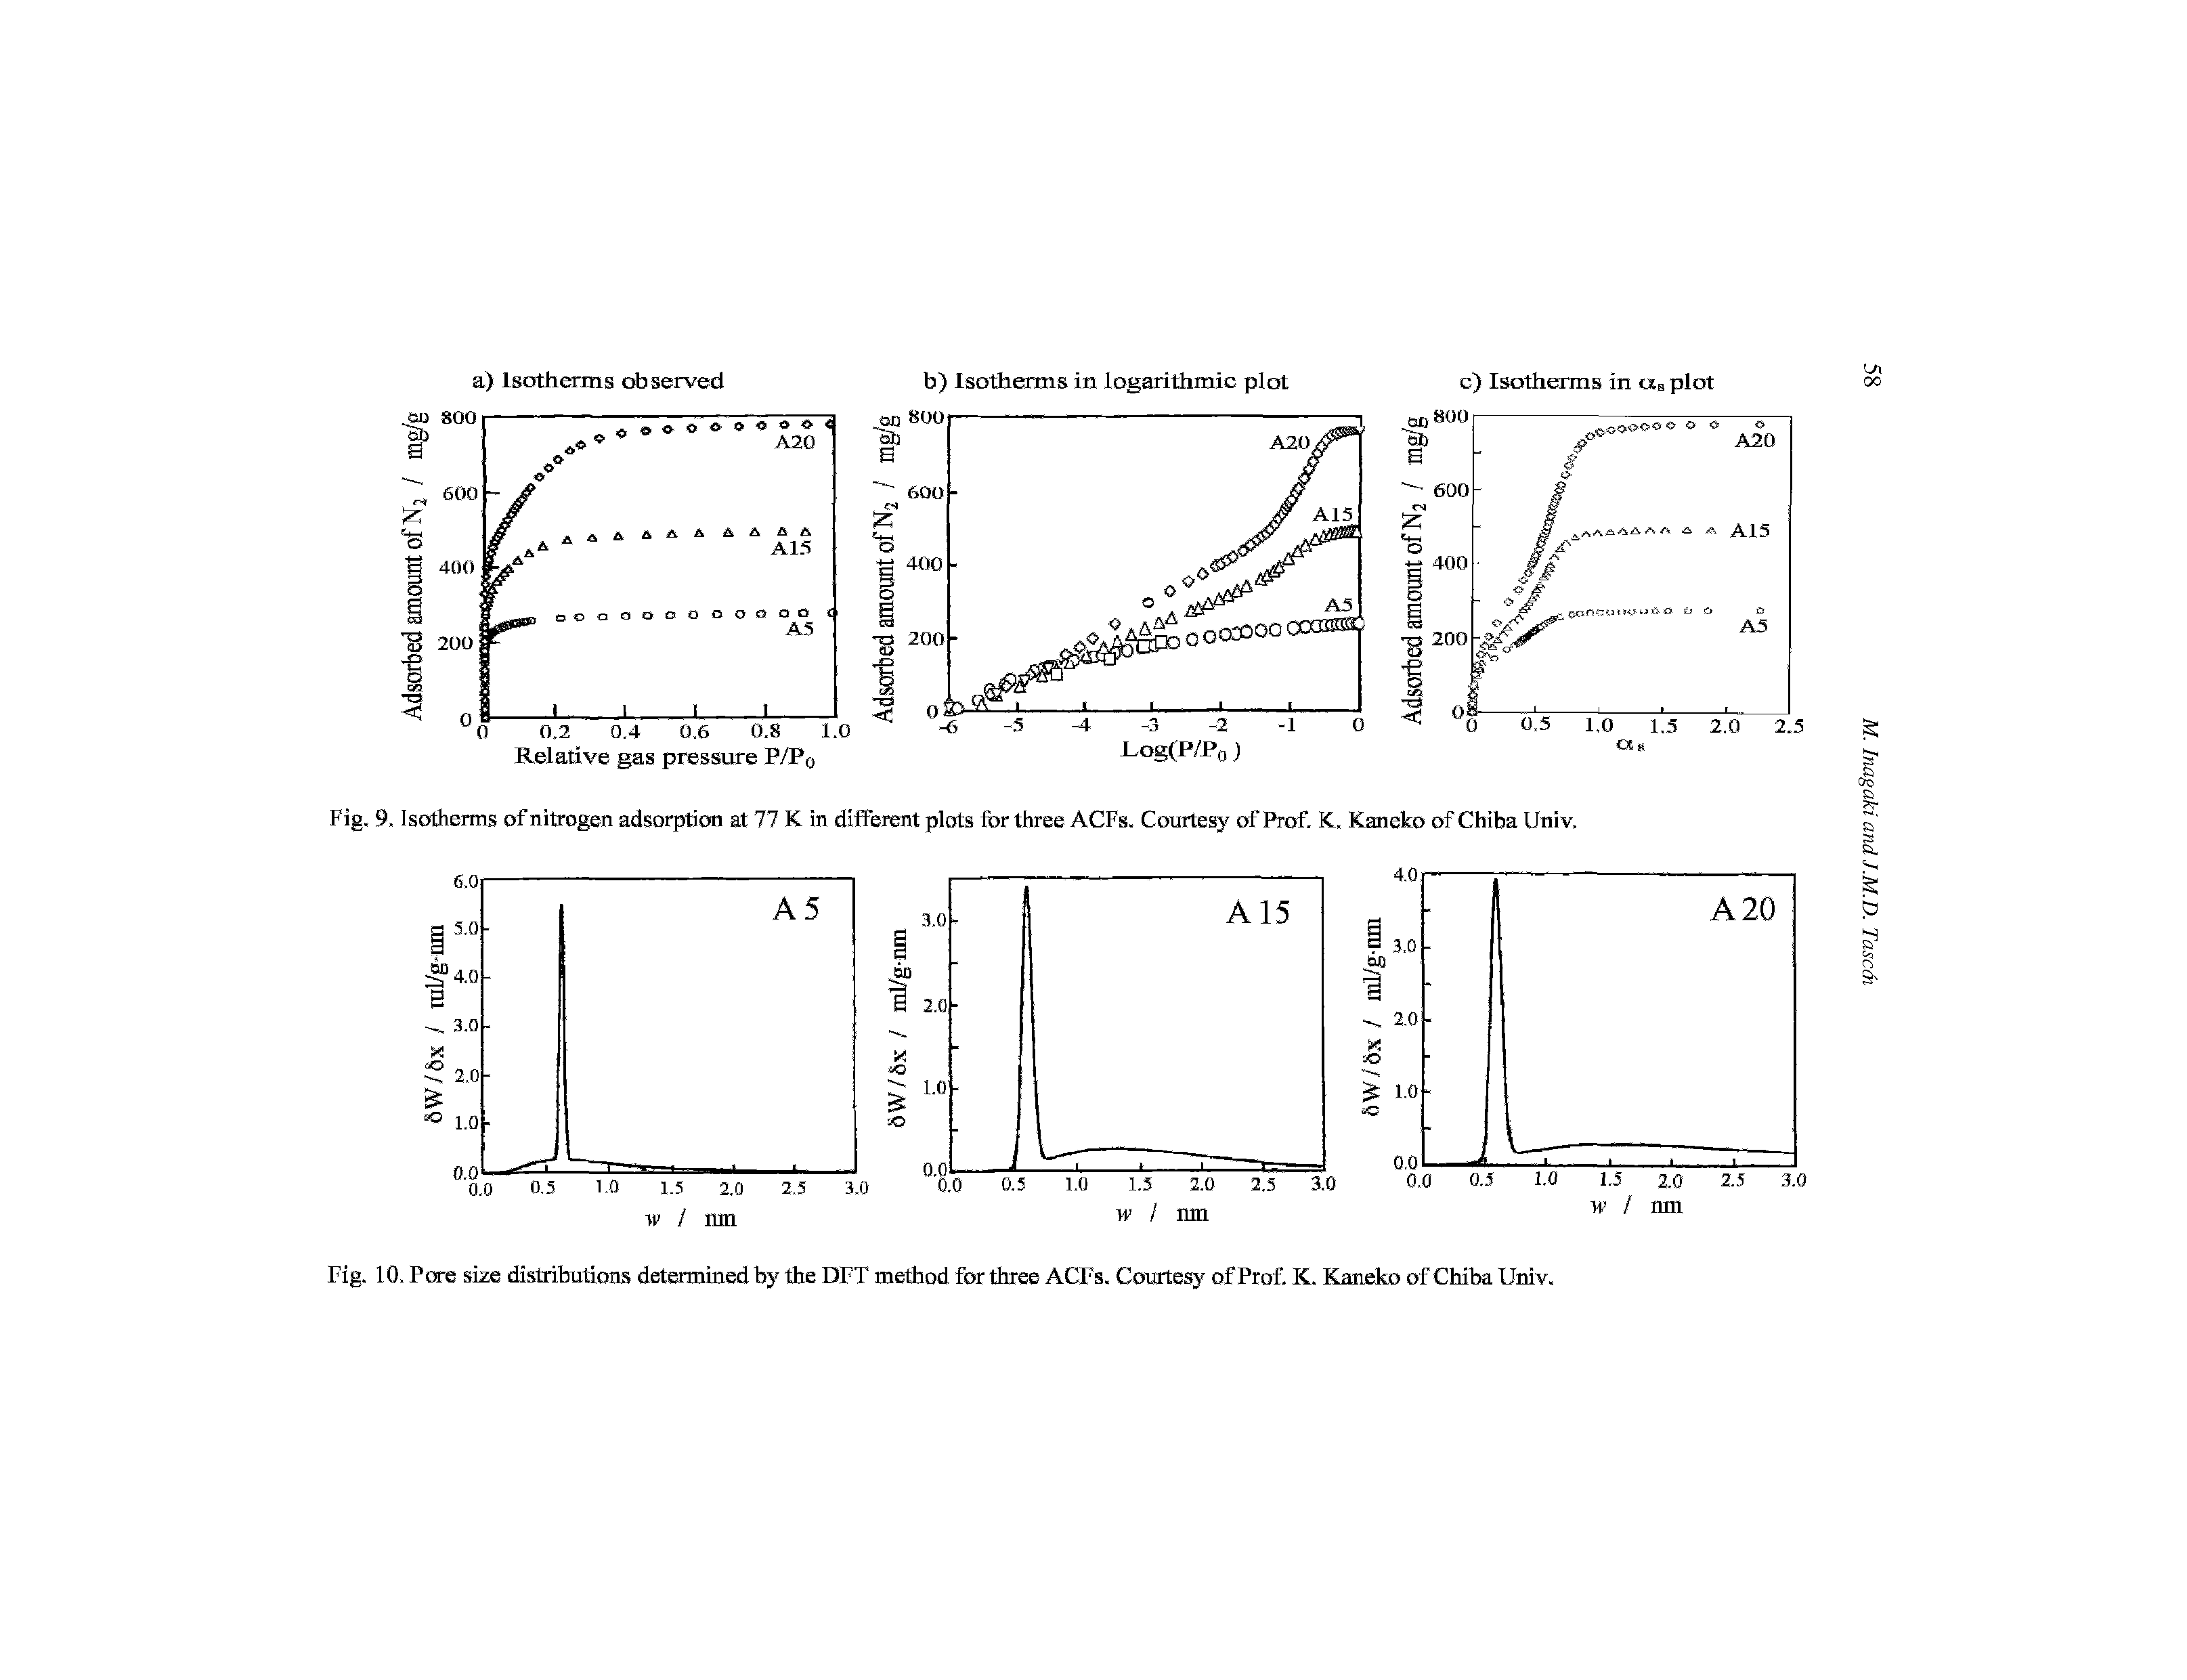 Fig. 9. Isotherms of nitrogen adsorption at 77 K in different plots for three ACFs. Courtesy of Prof. K. Kaneko of Chiba Univ.